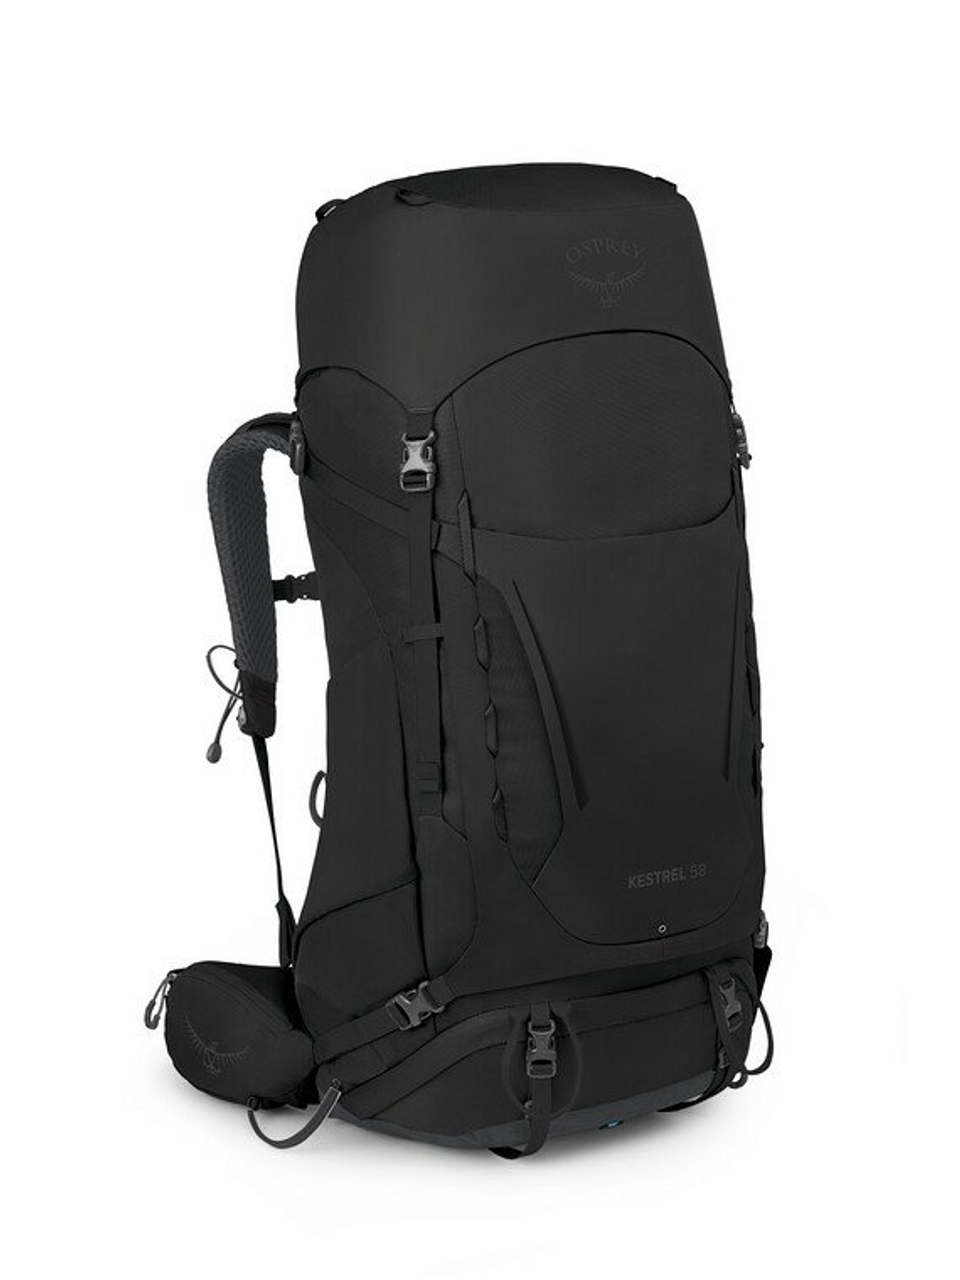 Backpack Review: Osprey Kestrel 32 - Goats On The Road